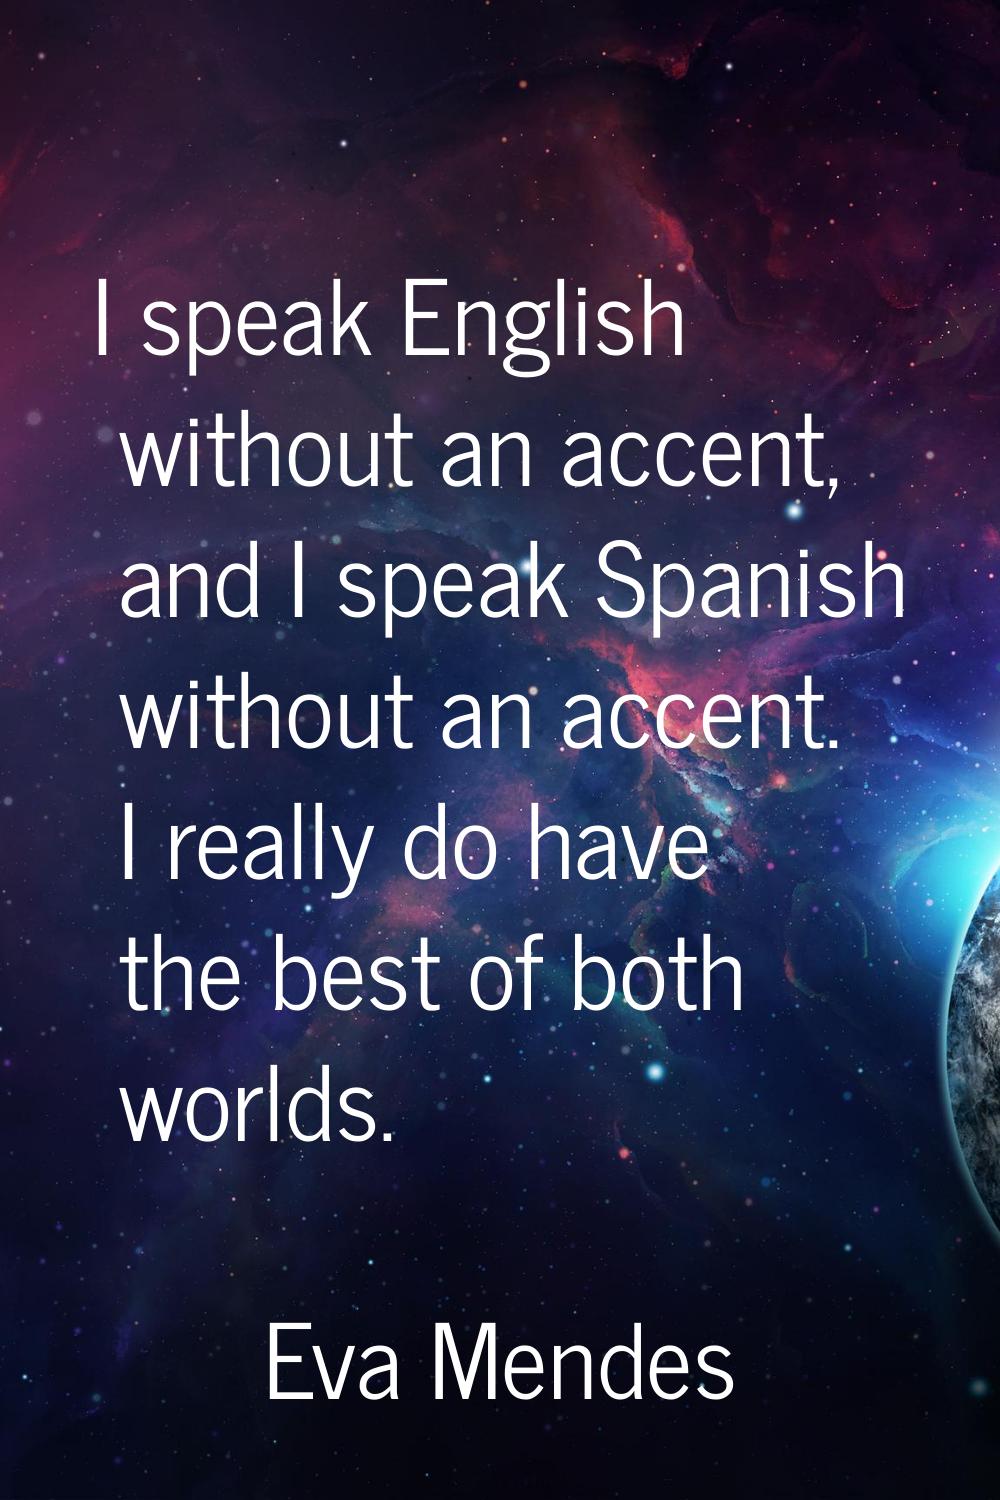 I speak English without an accent, and I speak Spanish without an accent. I really do have the best